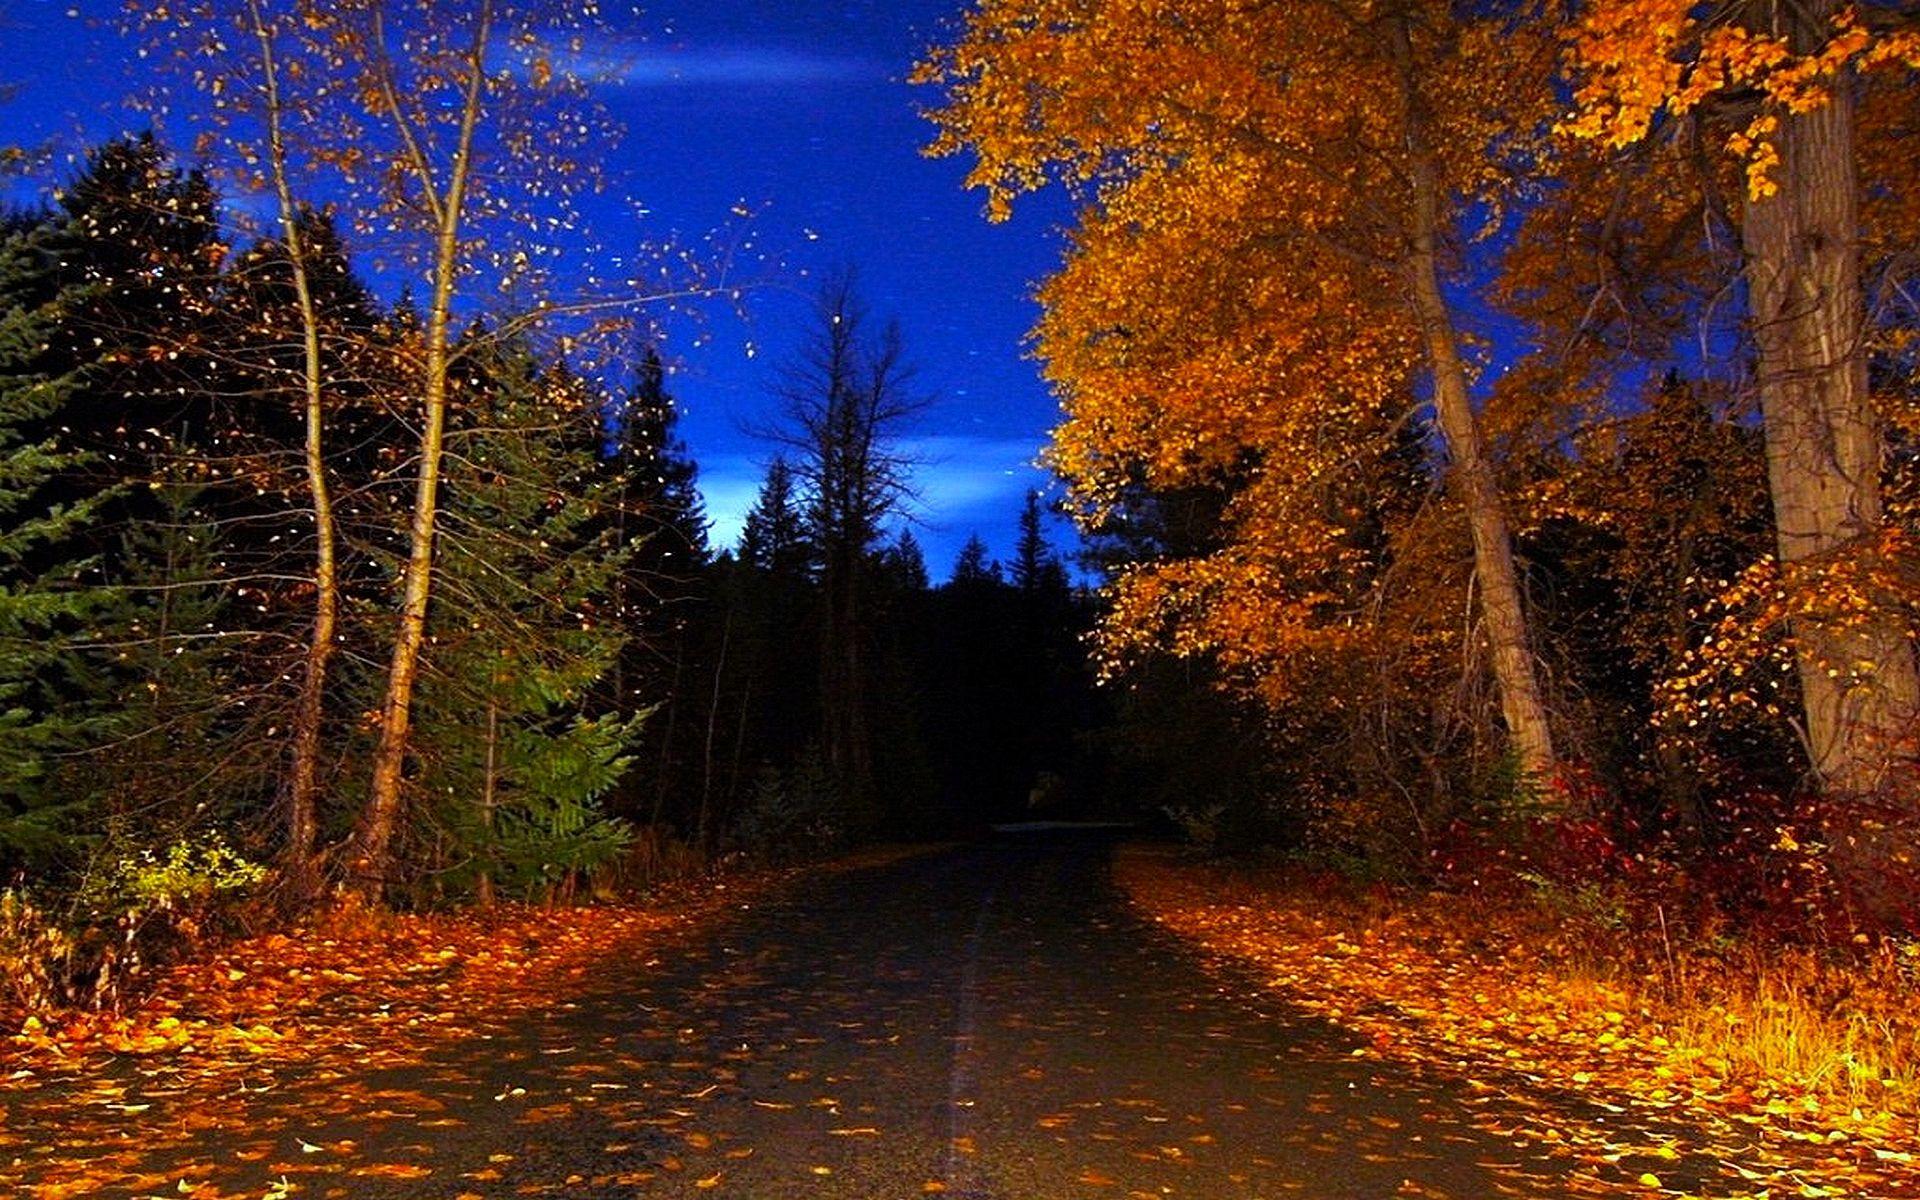 fall nights.. ROAD, AUTUMN, BLUE SKY, COUNTRY, FALL